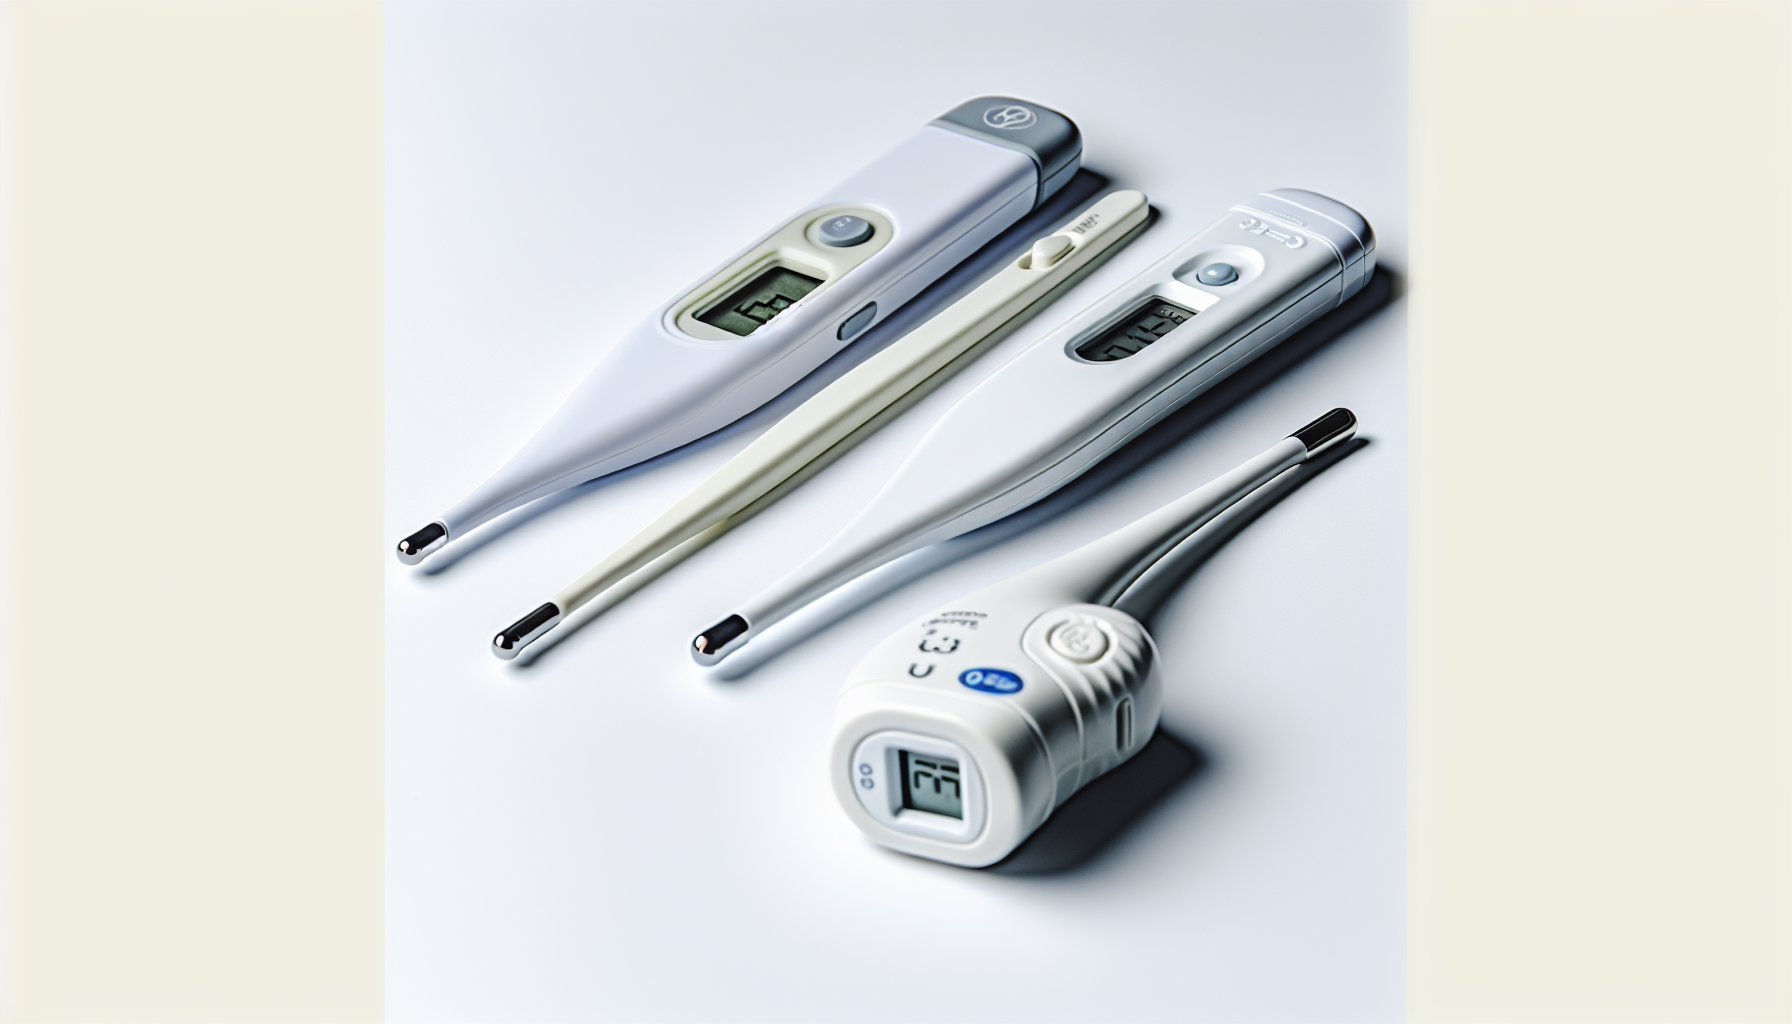 Variety of thermometers including digital stick, infrared, and temporal artery thermometers